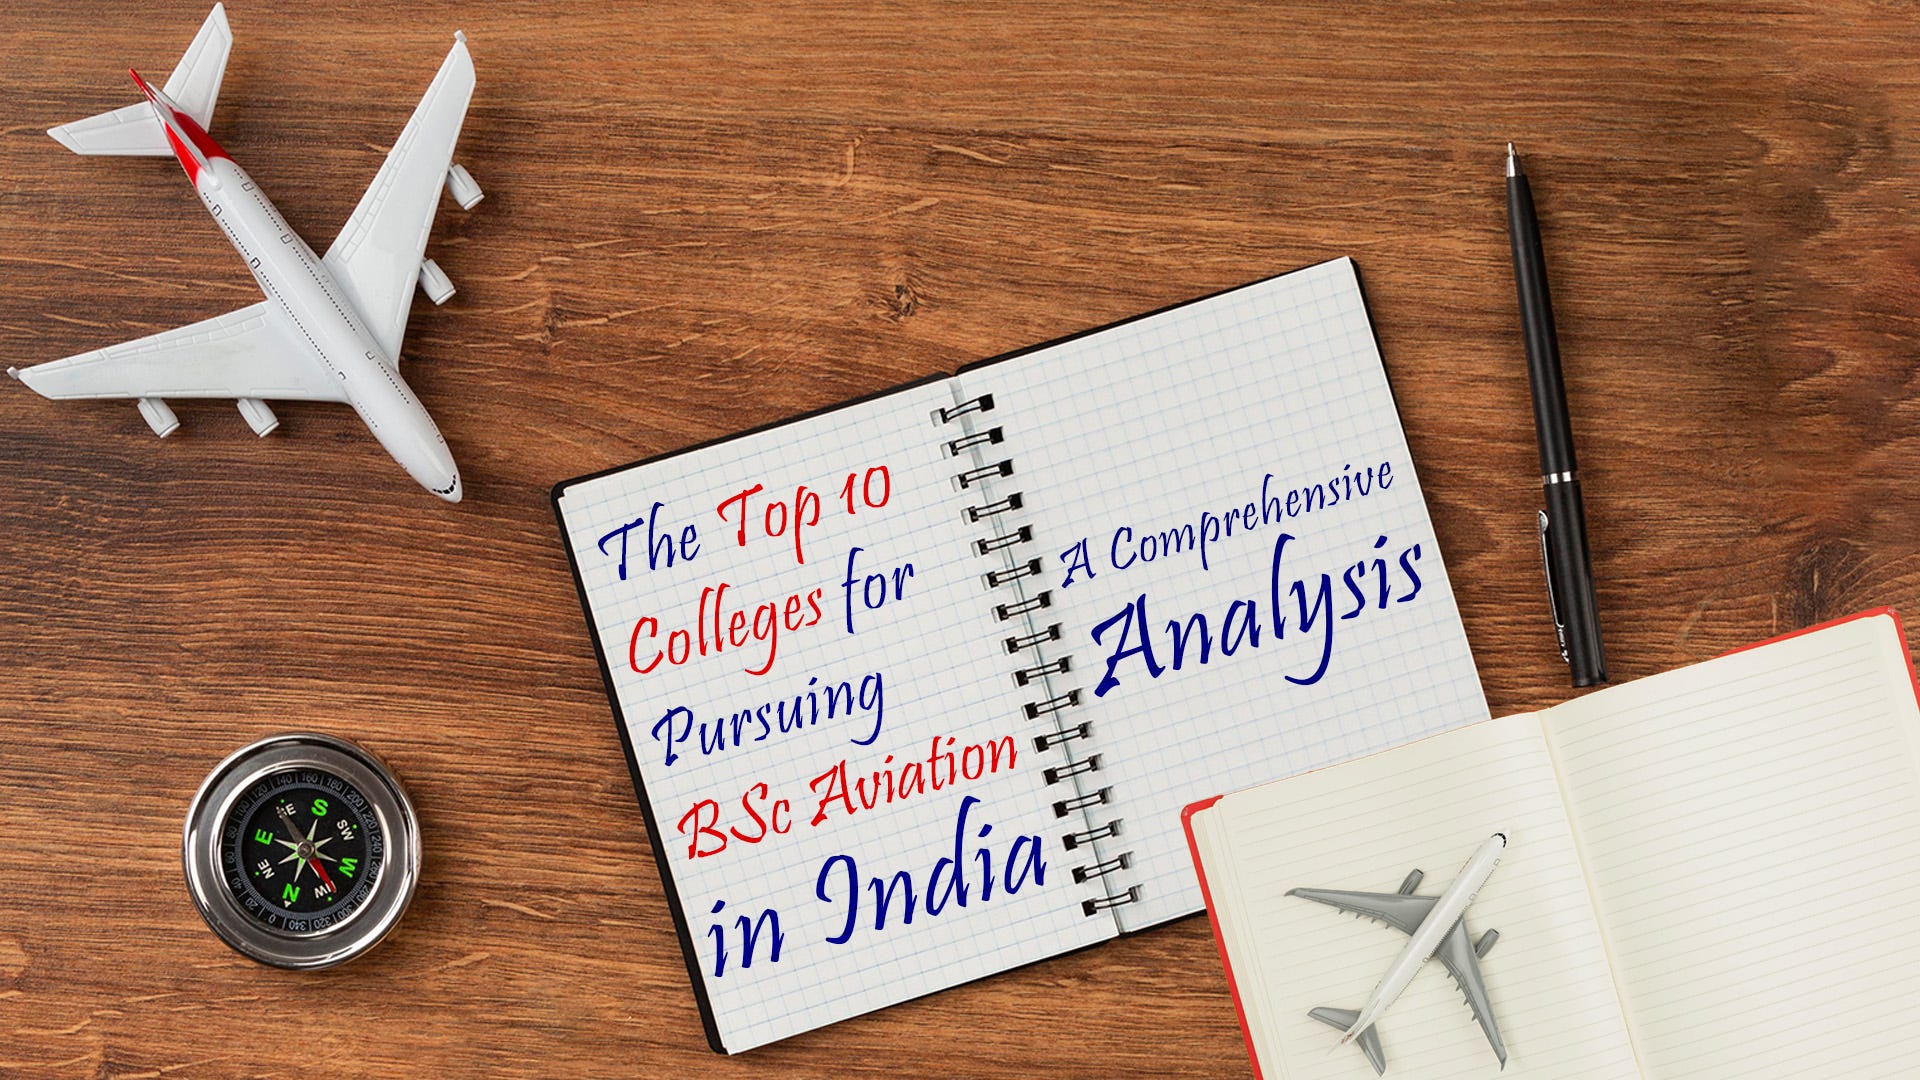 The Top 10 Colleges for Pursuing BSc Aviation in India: A Comprehensiv